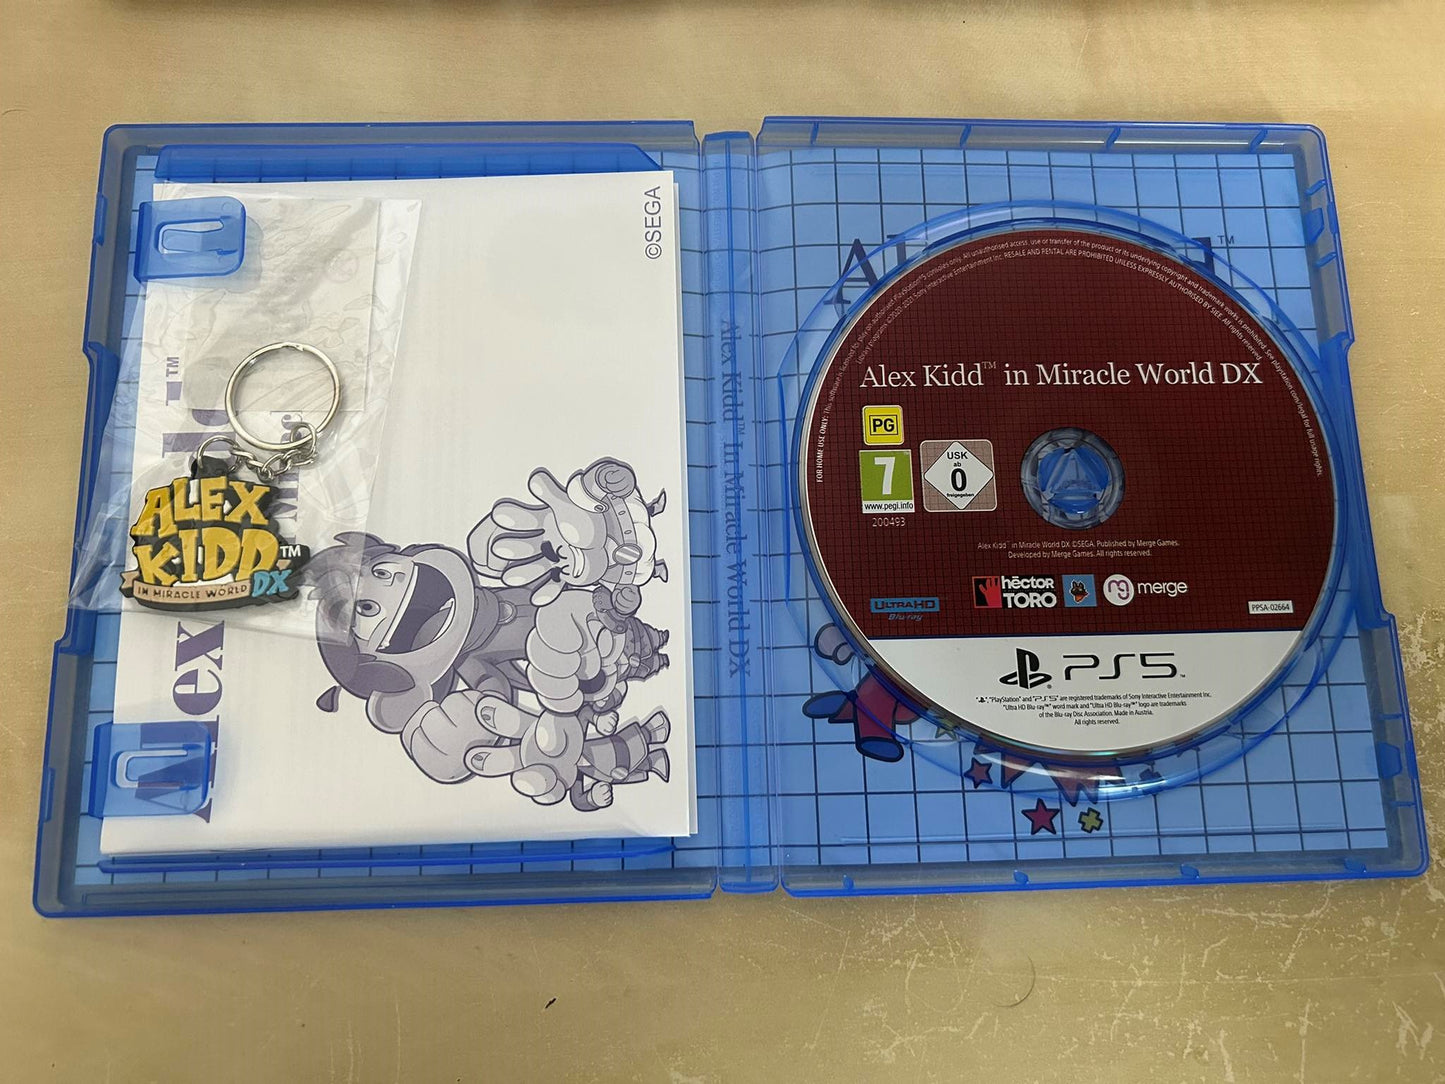 PS5 > Alex Kidd in Miracle World DX